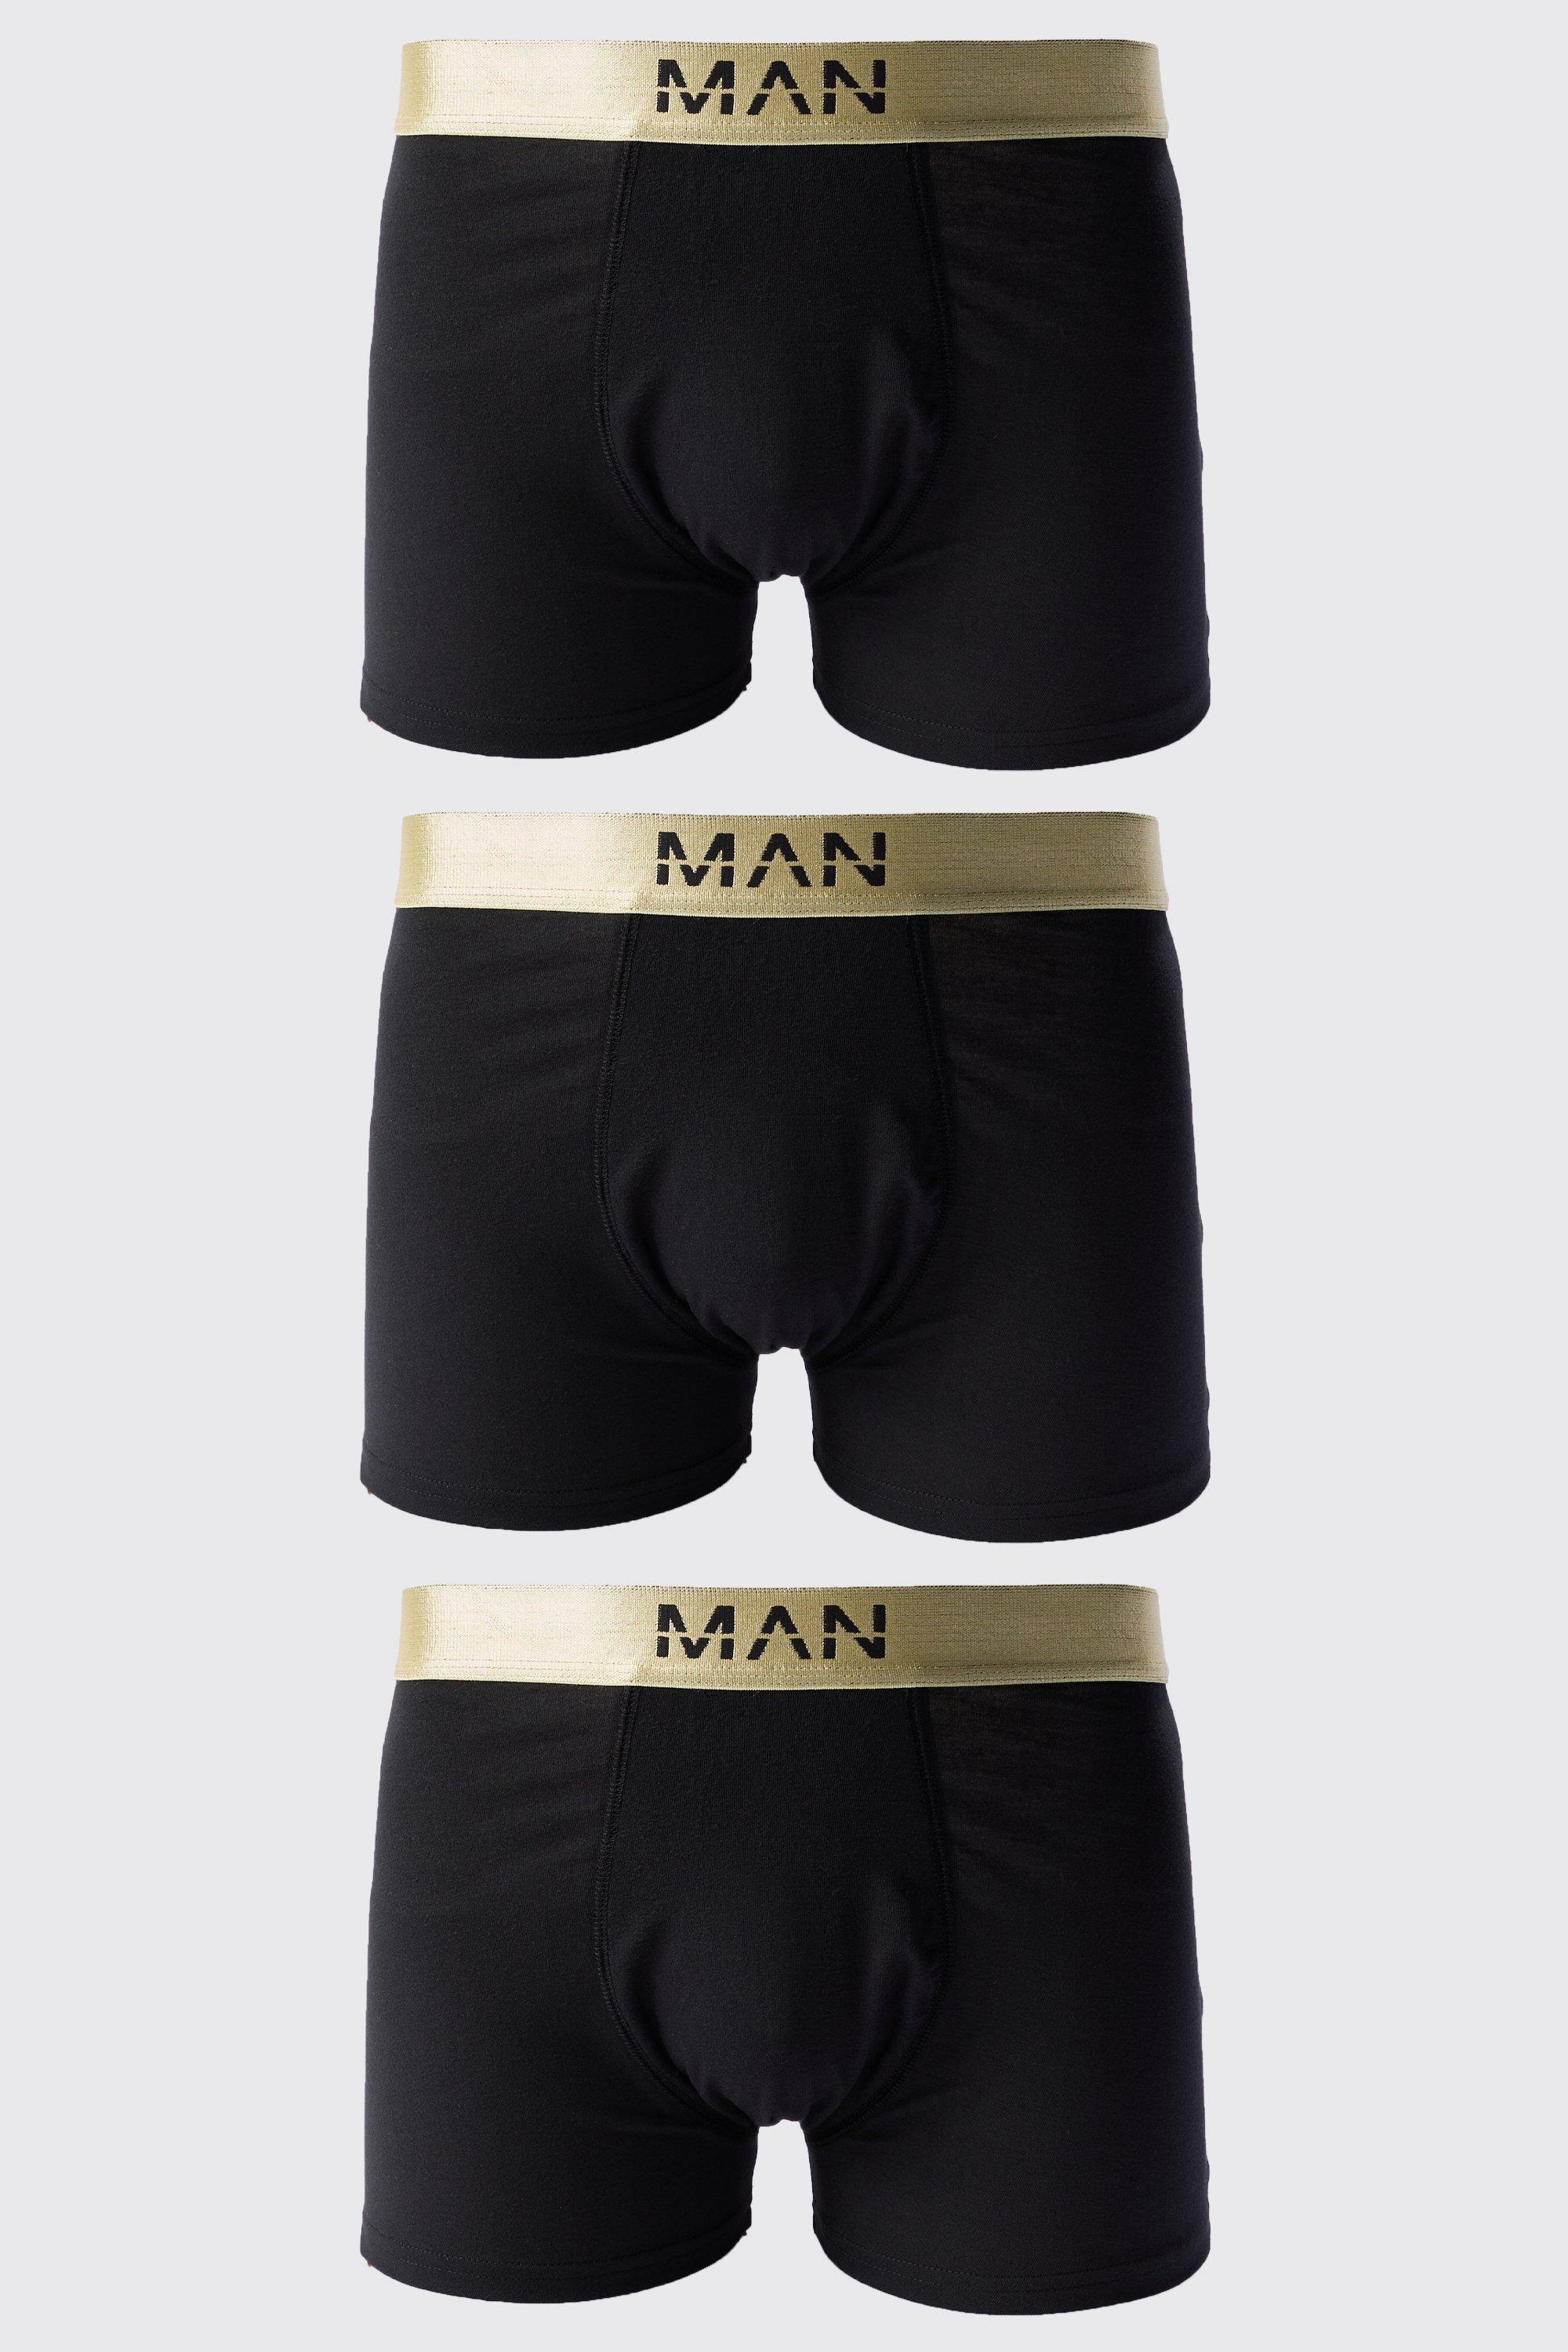 Image of 3 Pack Man Dash Gold Waistband Boxers In Black, Nero